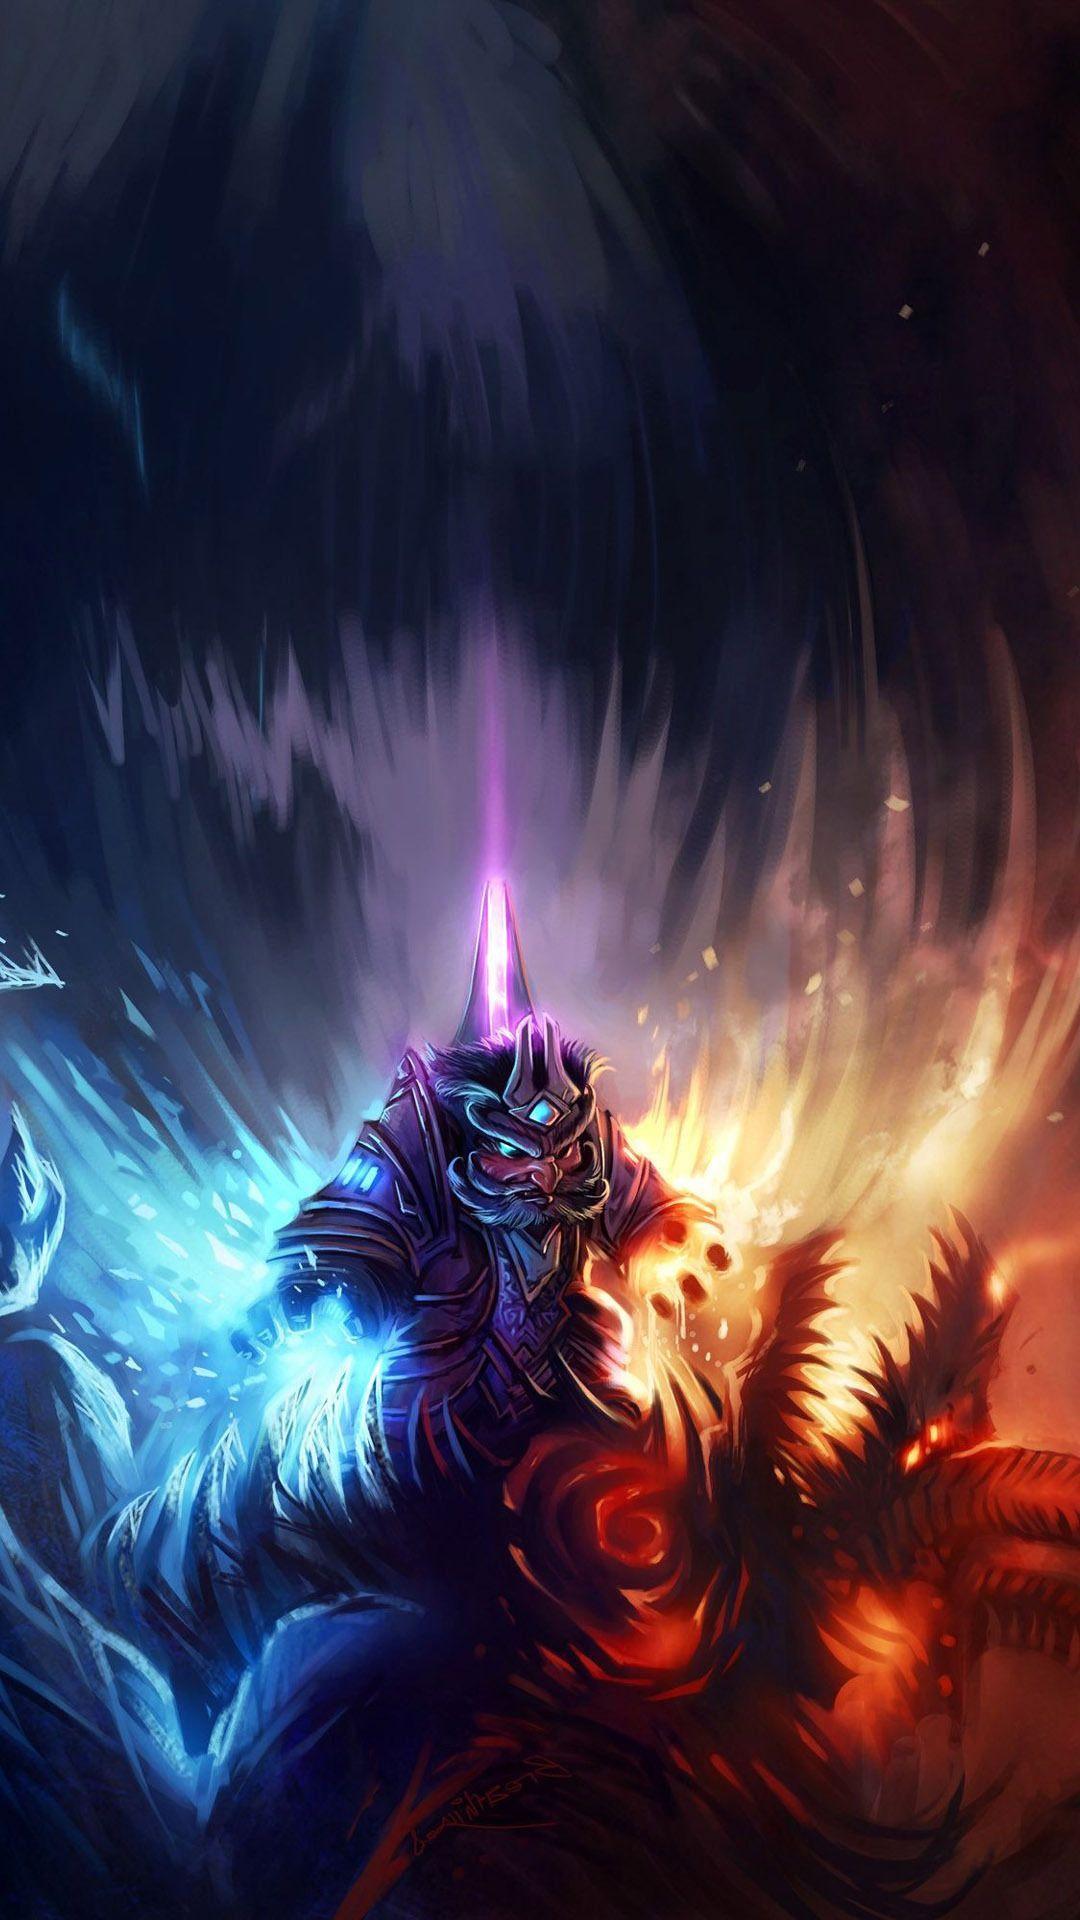 World Of Warcraft Cell Phone Wallpaper. Дневник